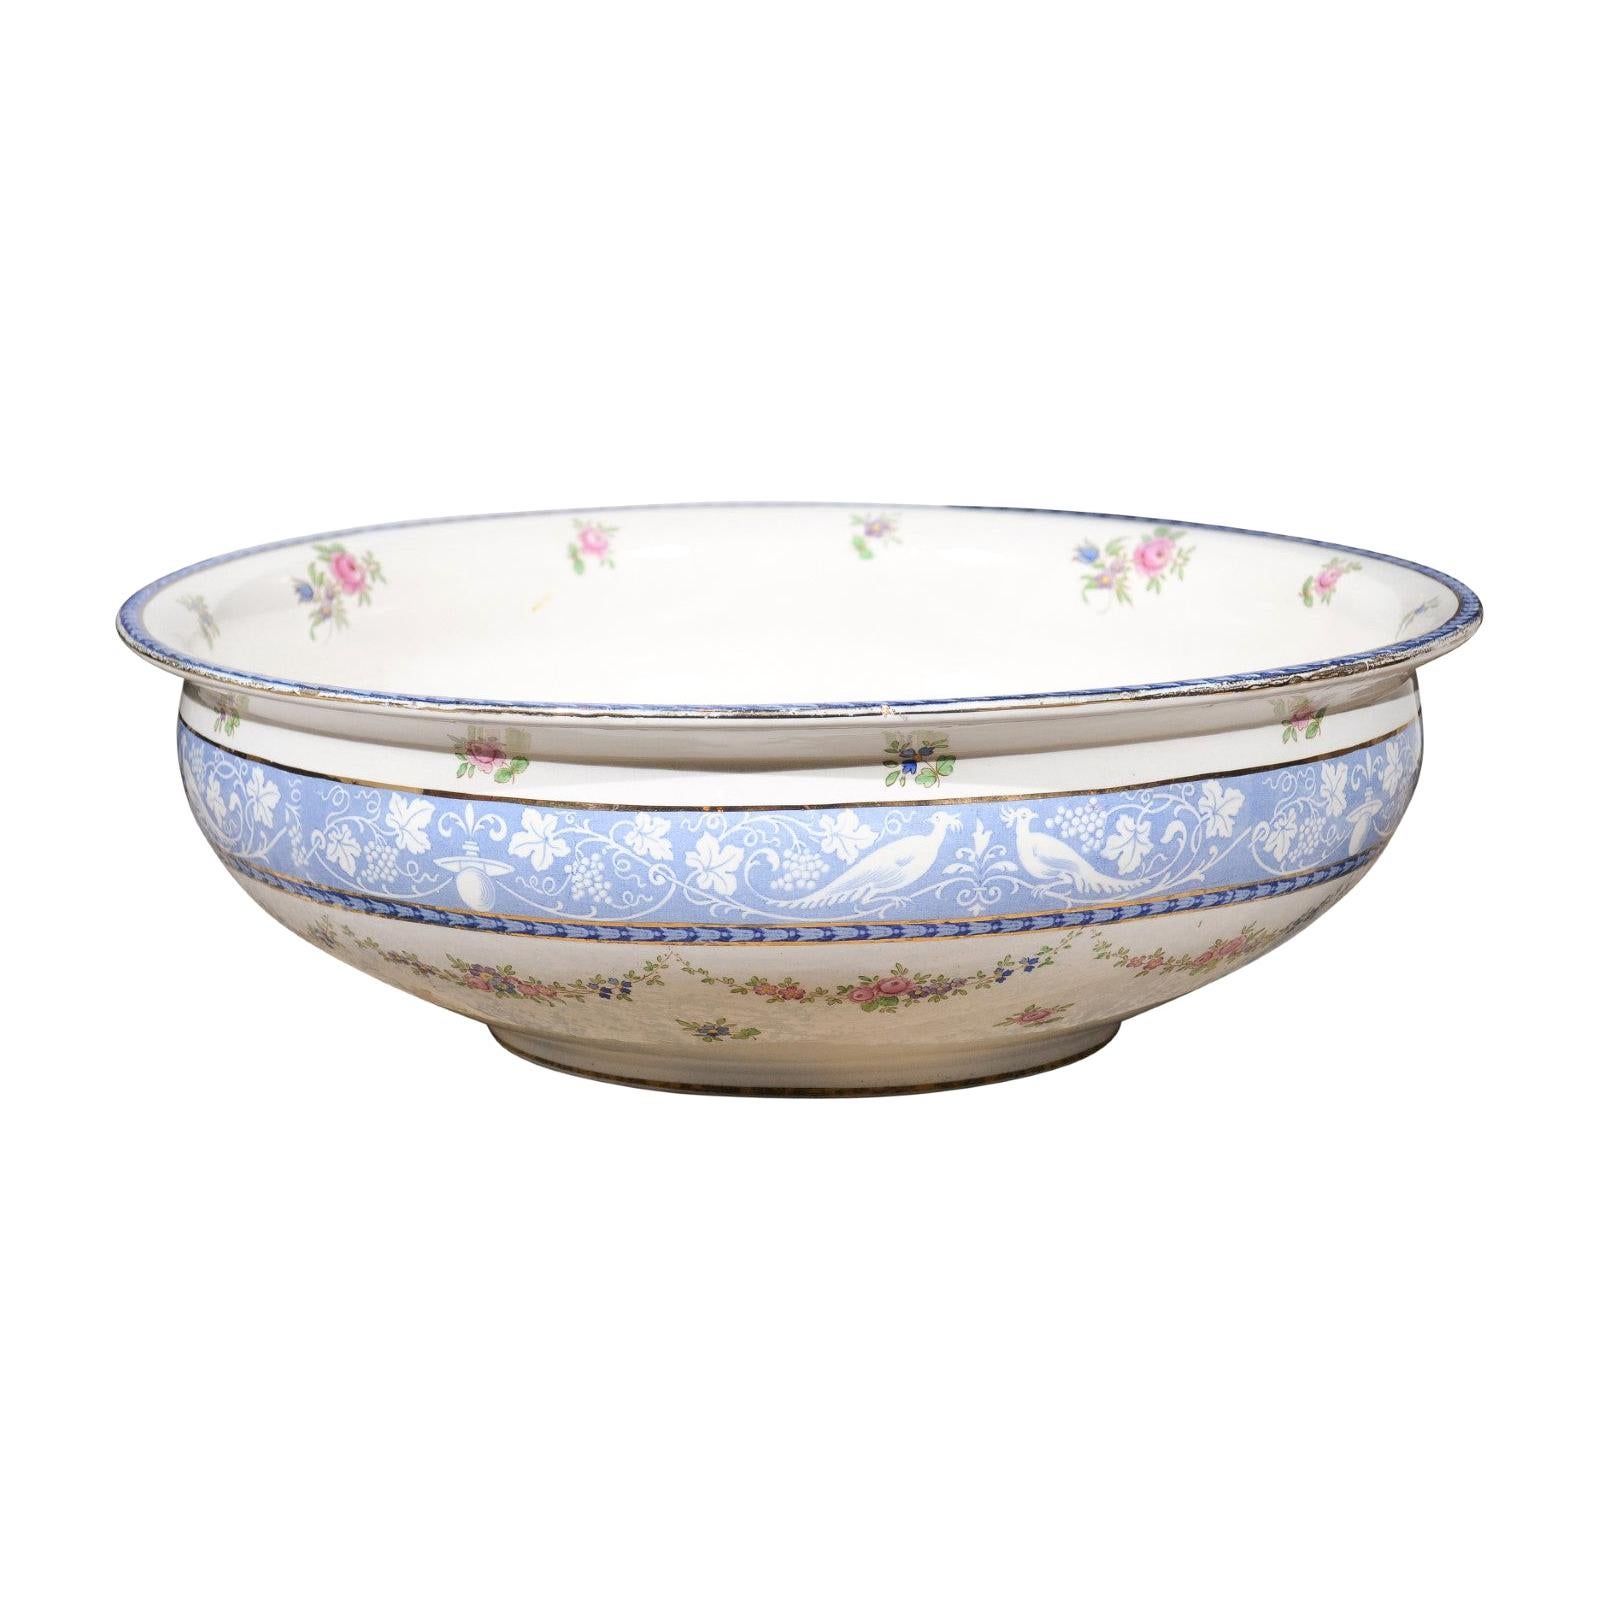 English Booth's China Cameo Pattern Bowl with Roses, Blue and White Pheasants